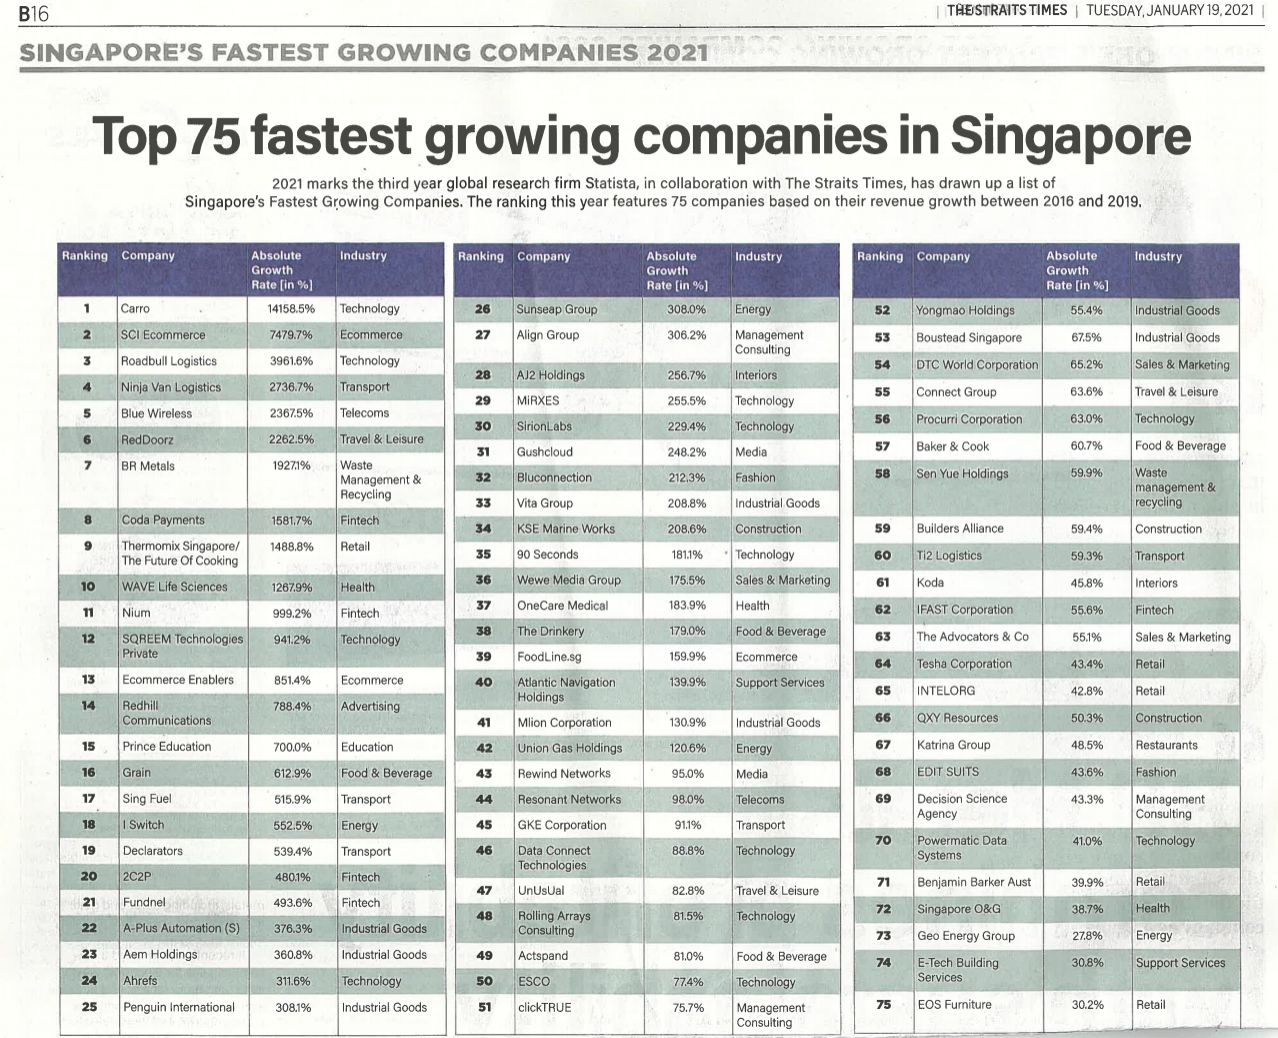 Straits Times: Singapore’s fastest-growing companies in 2021